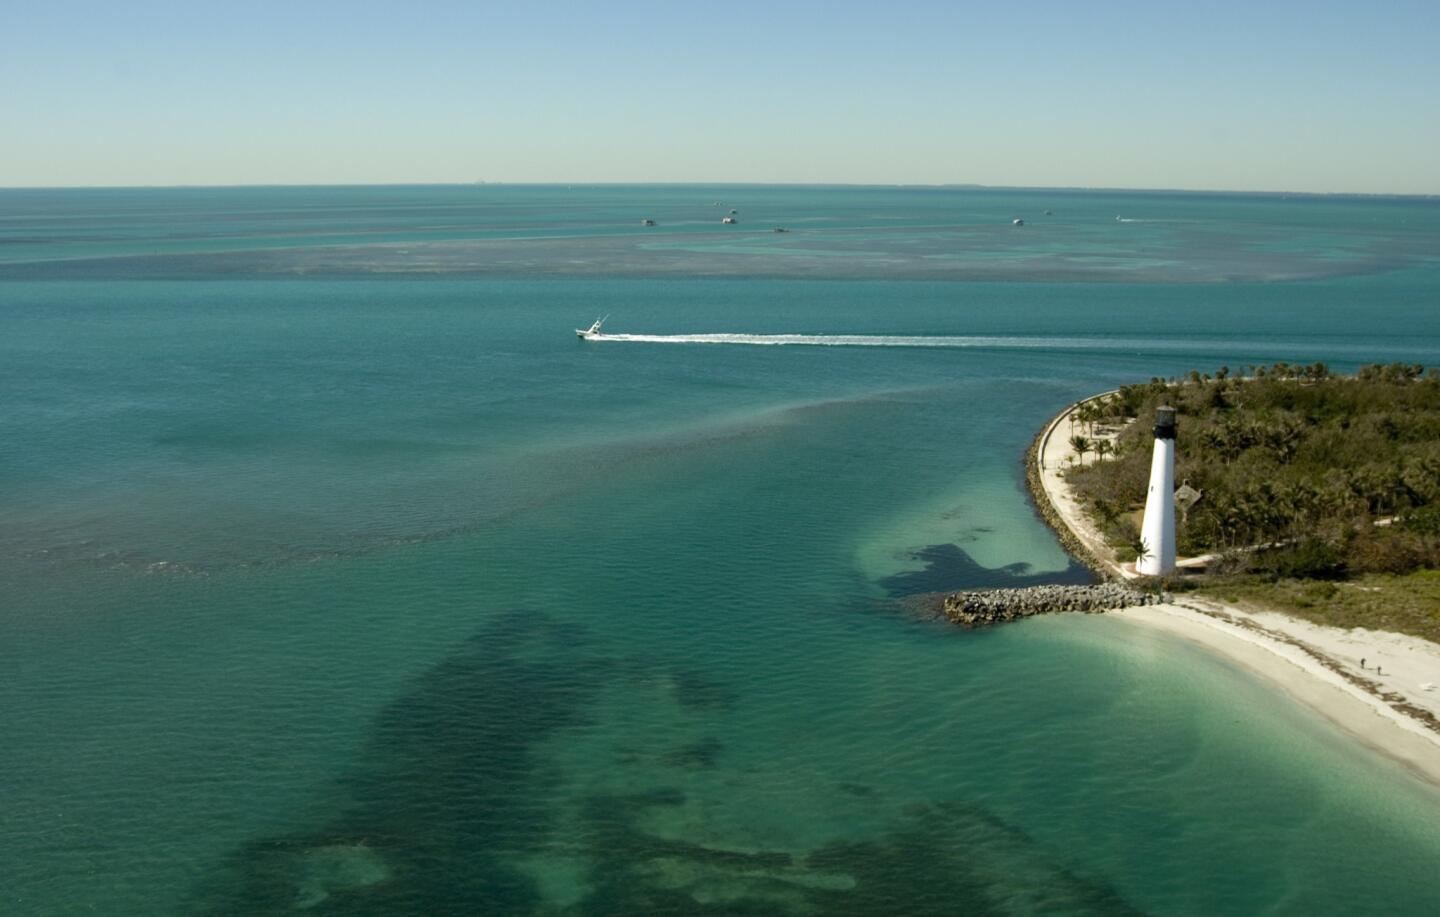 The lighthouse in Key Biscayne offers free guided tours with great views from the top.